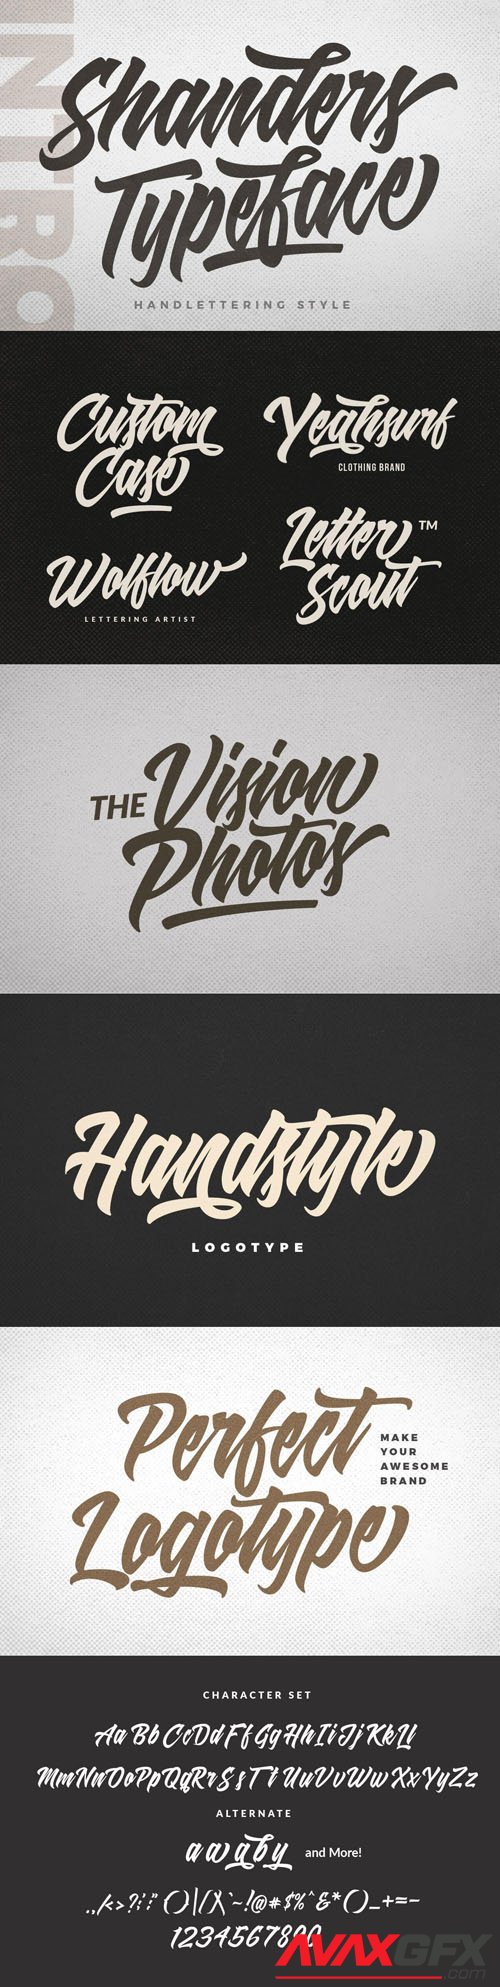 Shanders Typeface - Handlettering Style